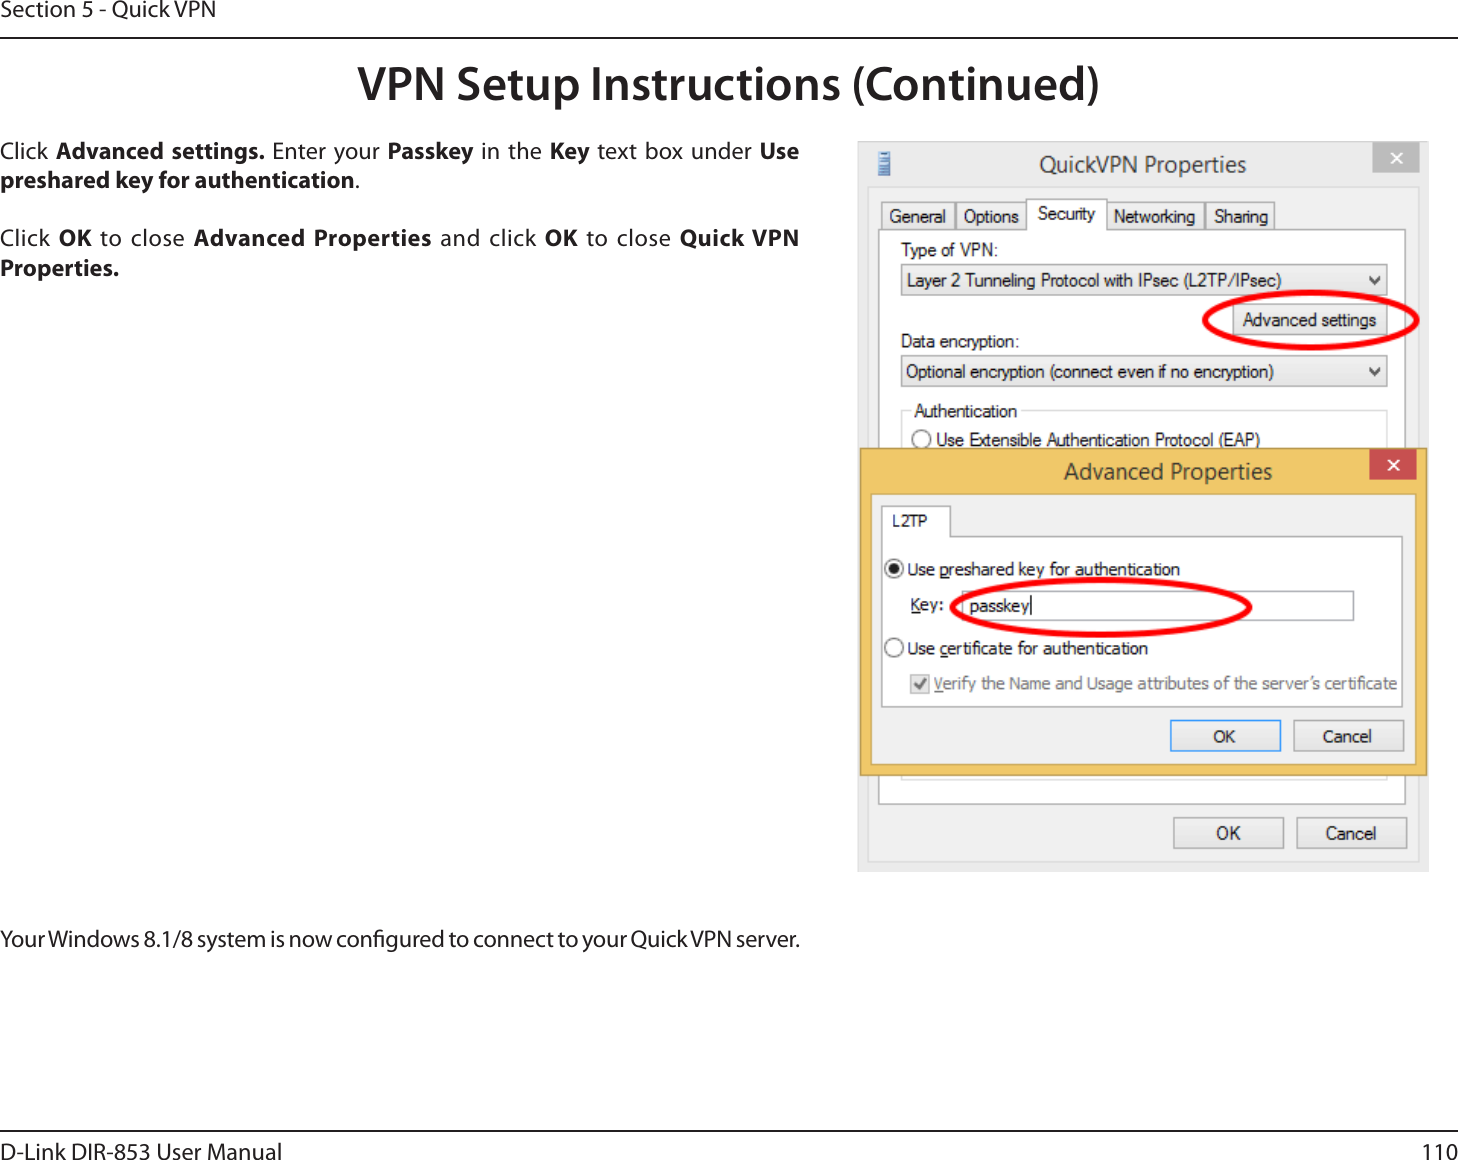 110D-Link DIR-853 User ManualSection 5 - Quick VPNClick Advanced settings. Enter your Passkey in the Key text box under Use preshared key for authentication. Click OK to close Advanced Properties and click OK to close Quick VPN Properties.Your Windows 8.1/8 system is now congured to connect to your Quick VPN server.VPN Setup Instructions (Continued)